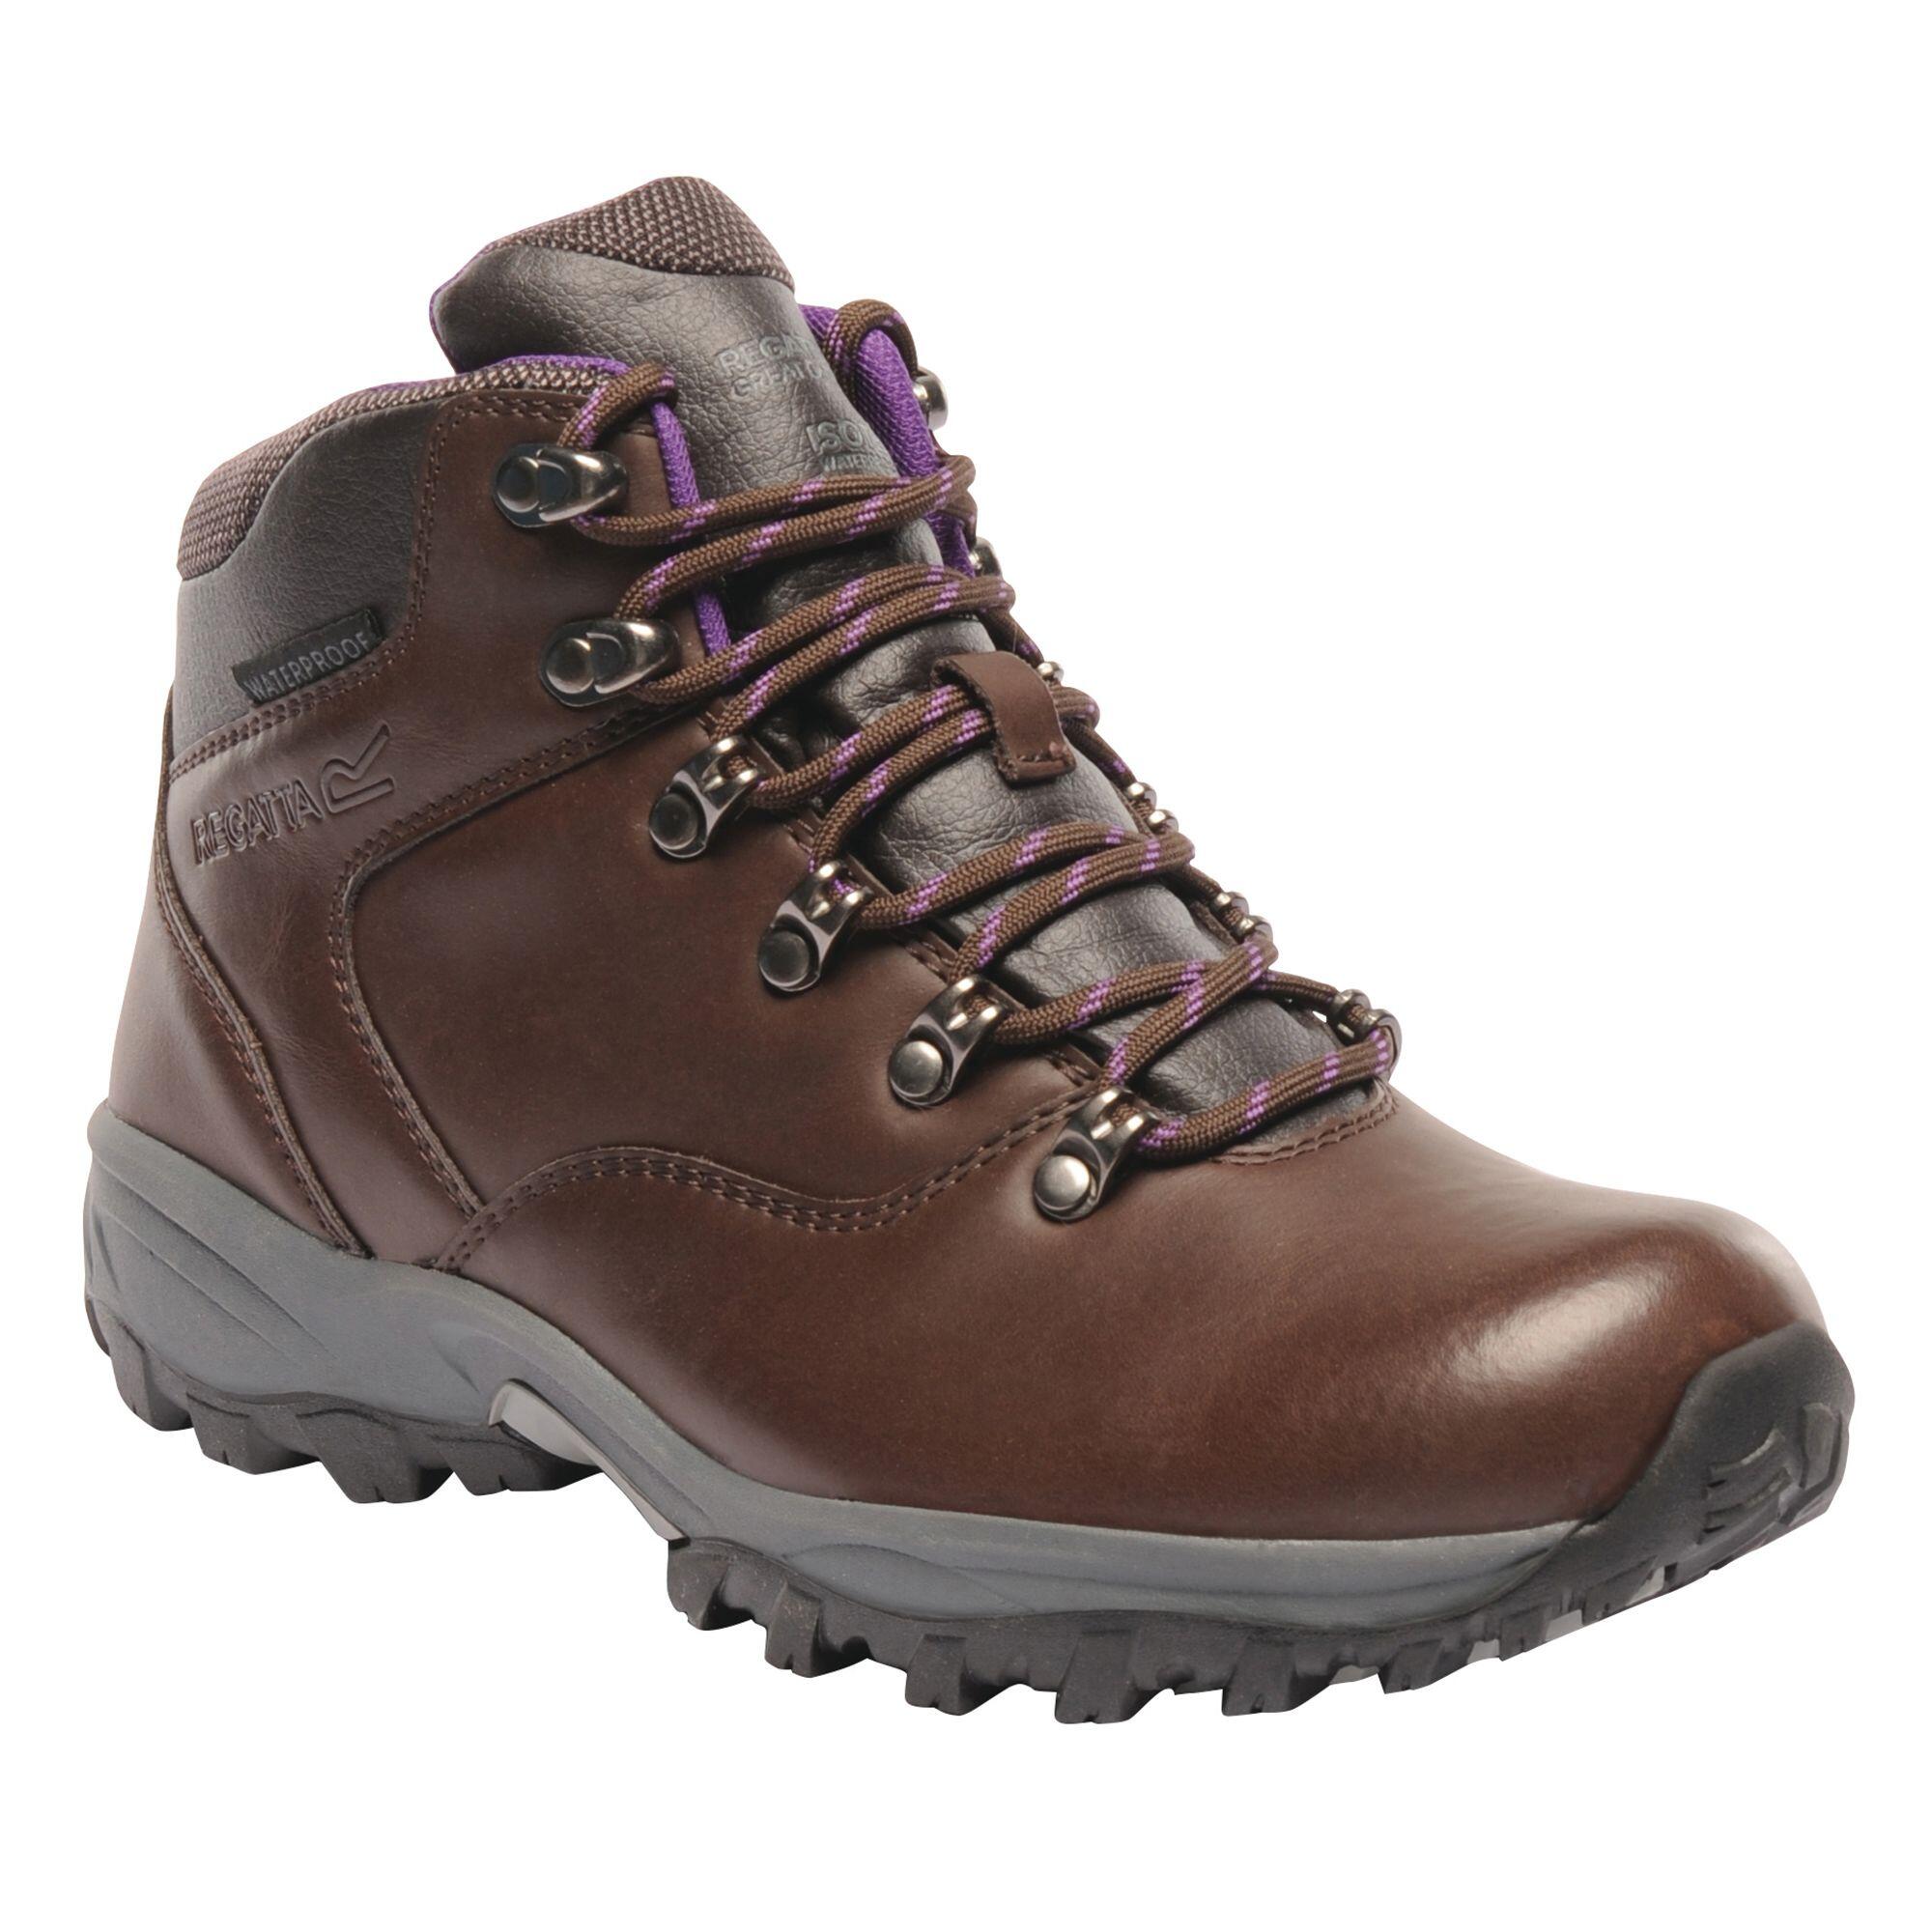 Great Outdoors Womens/Ladies Bainsford Waterproof Hiking Boots (Chestnut/Alpine 4/5